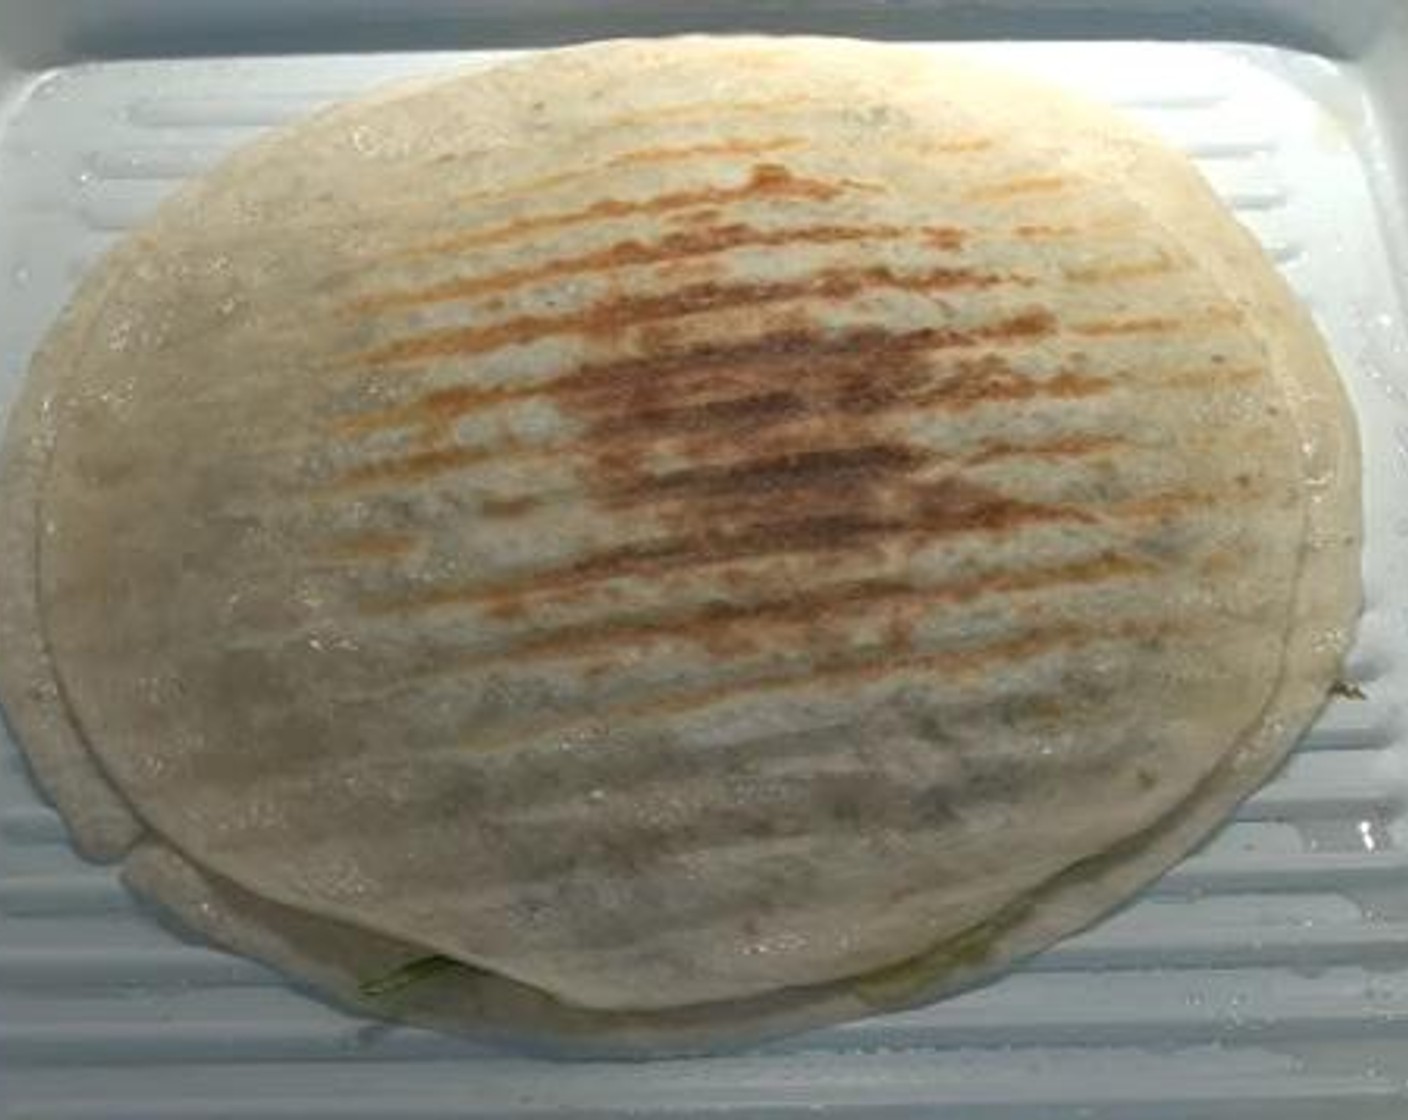 step 4 Use a regular frying pan with some oil in it, and separately cook each tortilla sandwich for 2 minutes each side.